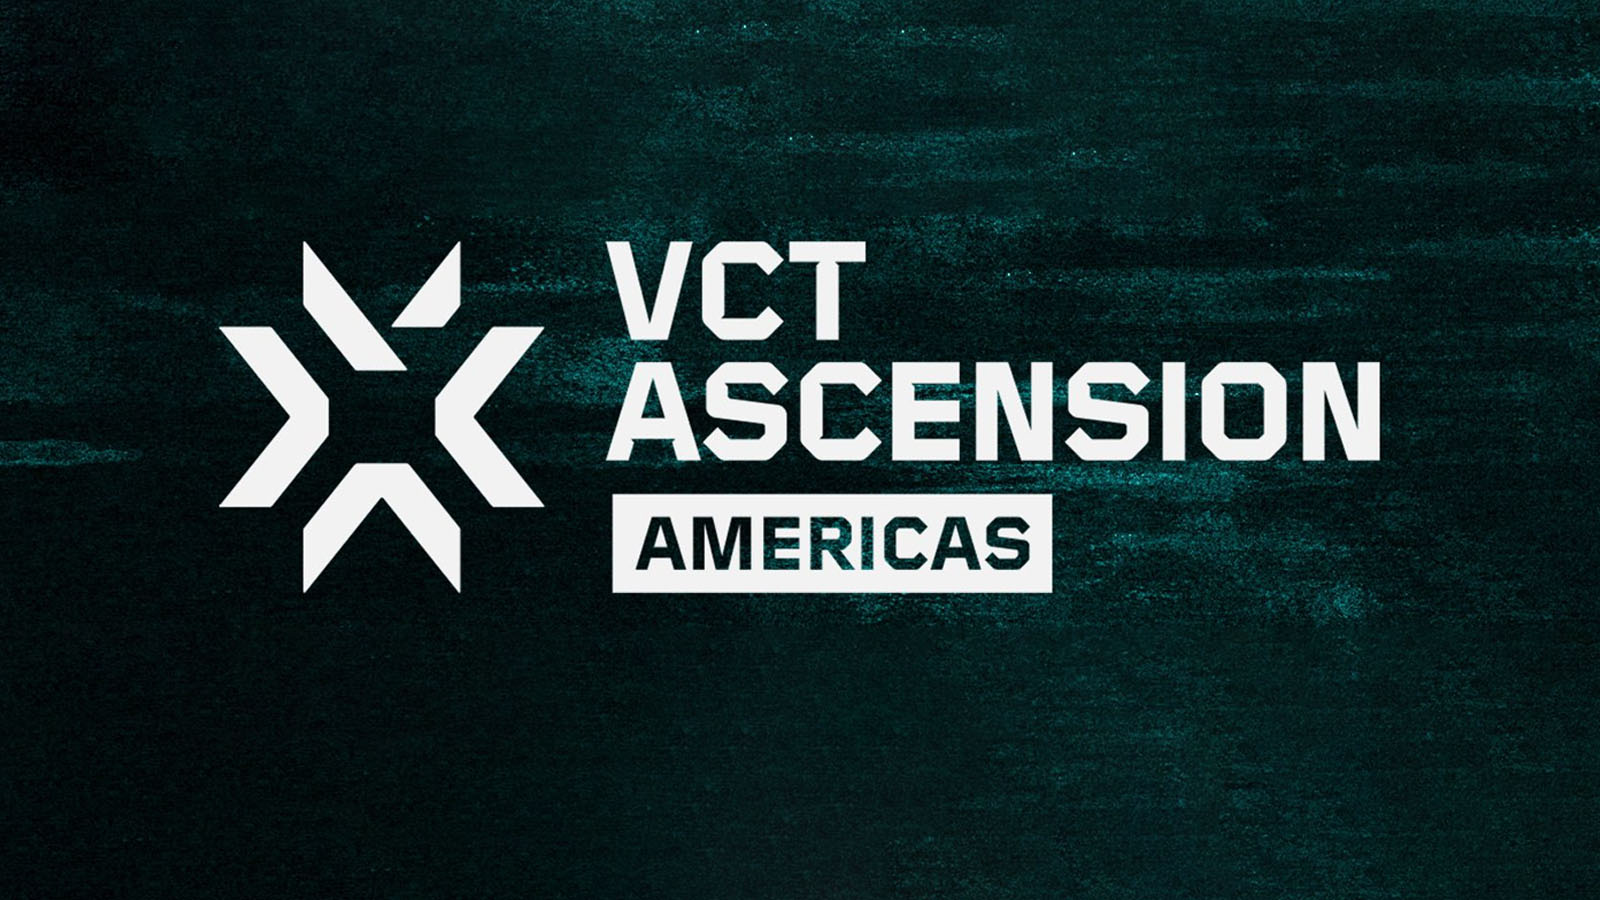 VCT Ascension Americas 2023 tournament to kick off in Brazil ONE Esports